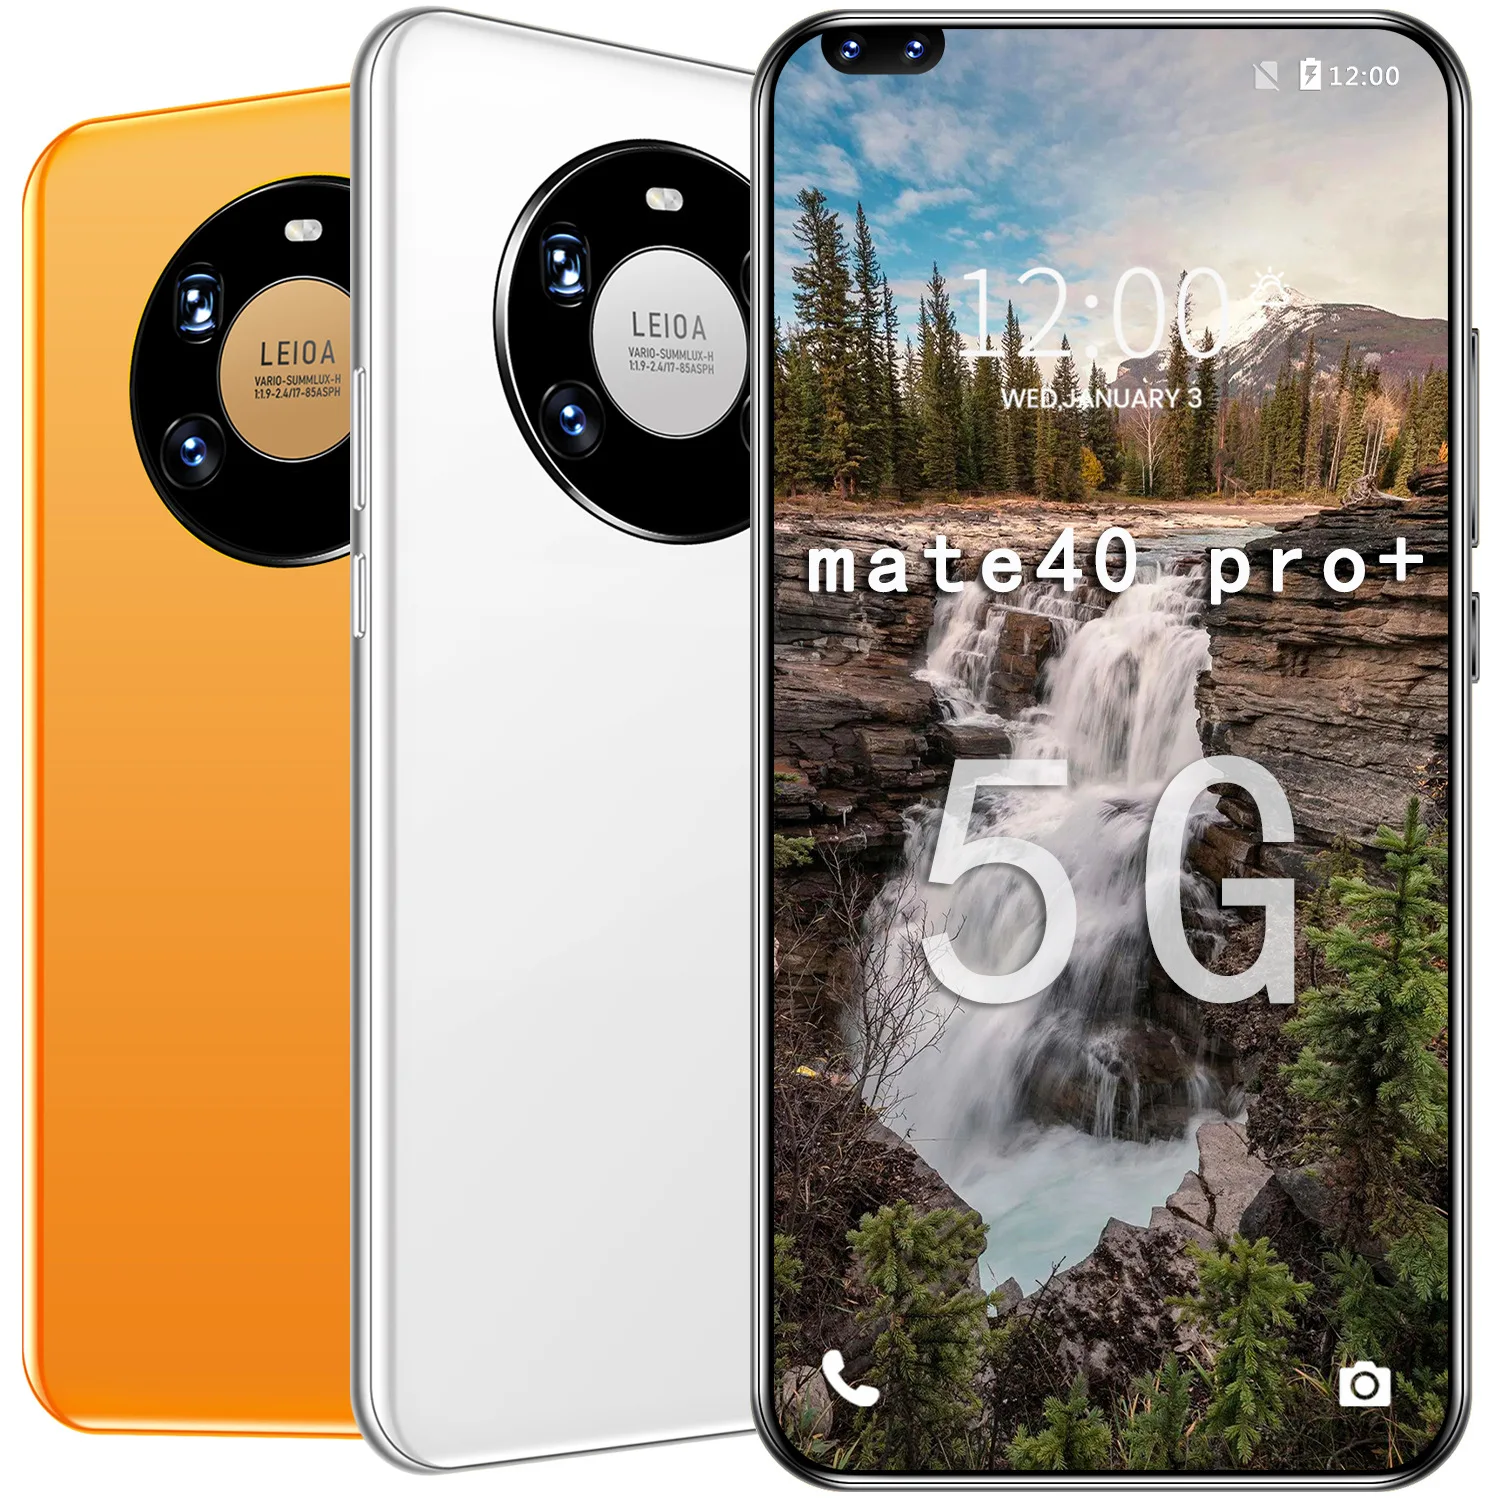 

5G Mate40 Pro+ 7.3 Inch Full Screen Smartphone 12G+512G Face Unlock Mobile Phone Android 10.0, Silver/black/green/yellow